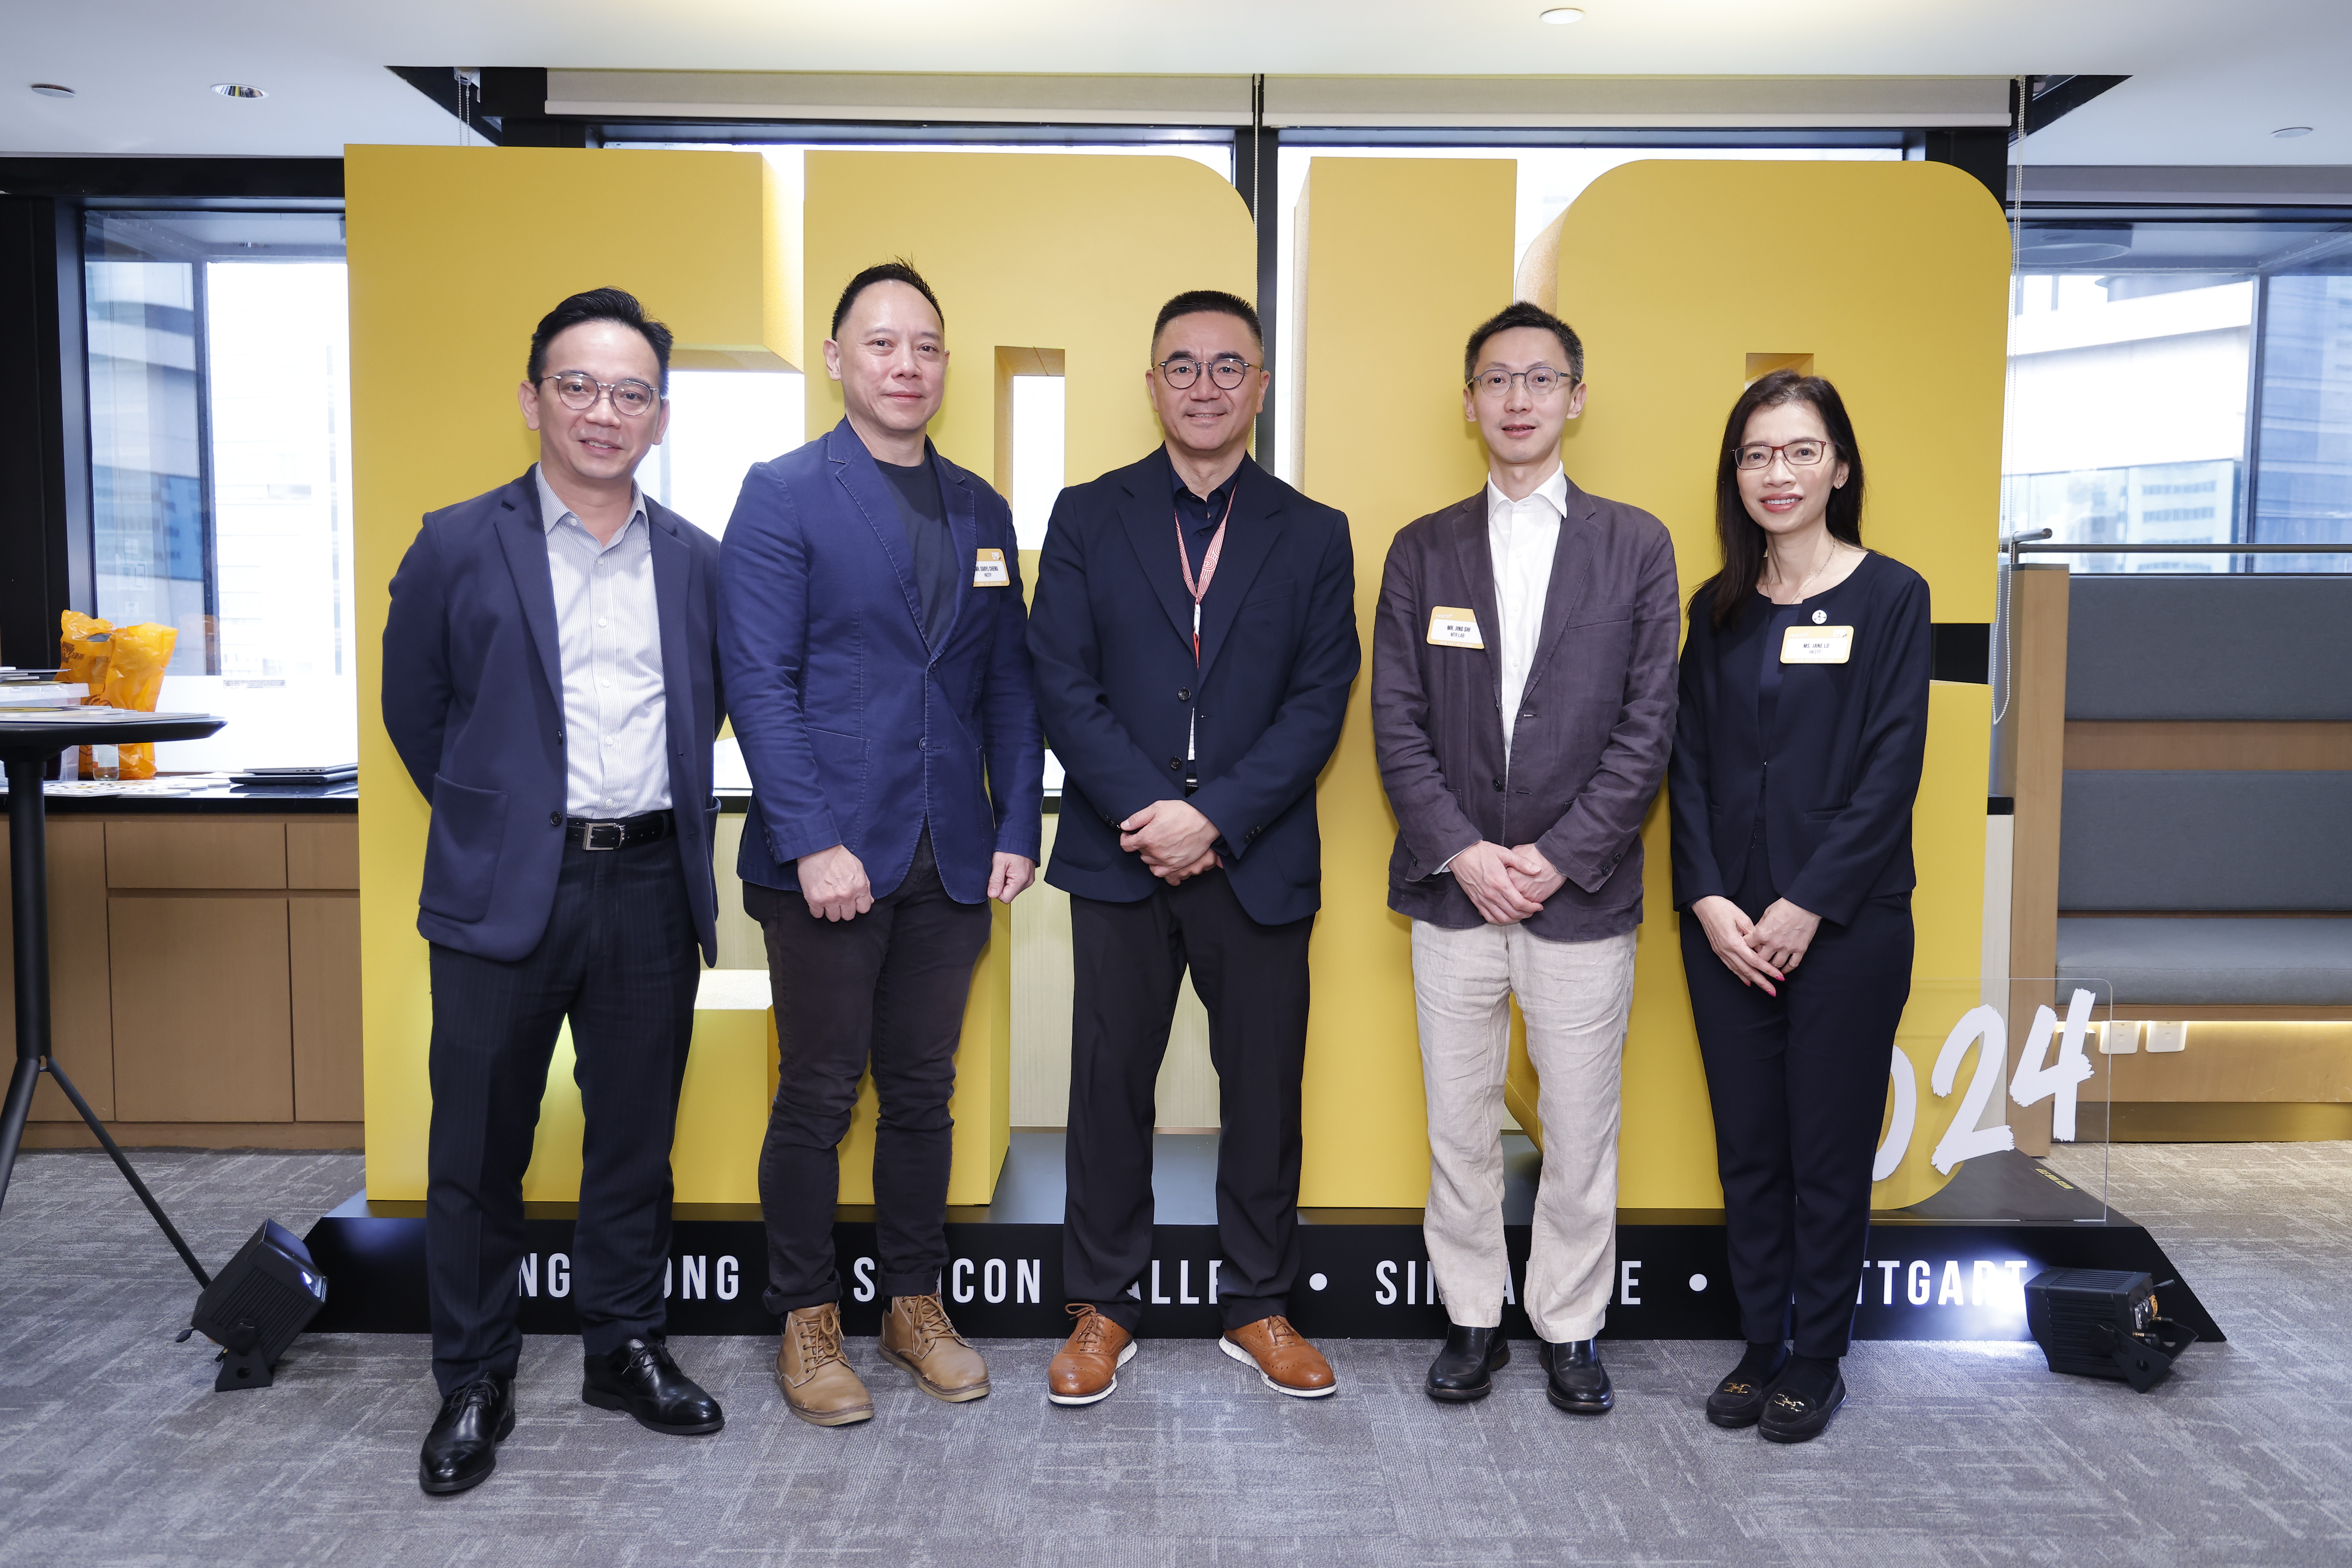 Photo 1: HKSTP successfully completed regional Elevator Pitch Competition 2024 (EPiC) Hong Kong Semi-final on 29 February 2024, with 12 of the Hong Kong’s brightest innovators selected to participate in EPiC 2024 Grand Finale on 26 April 2024.